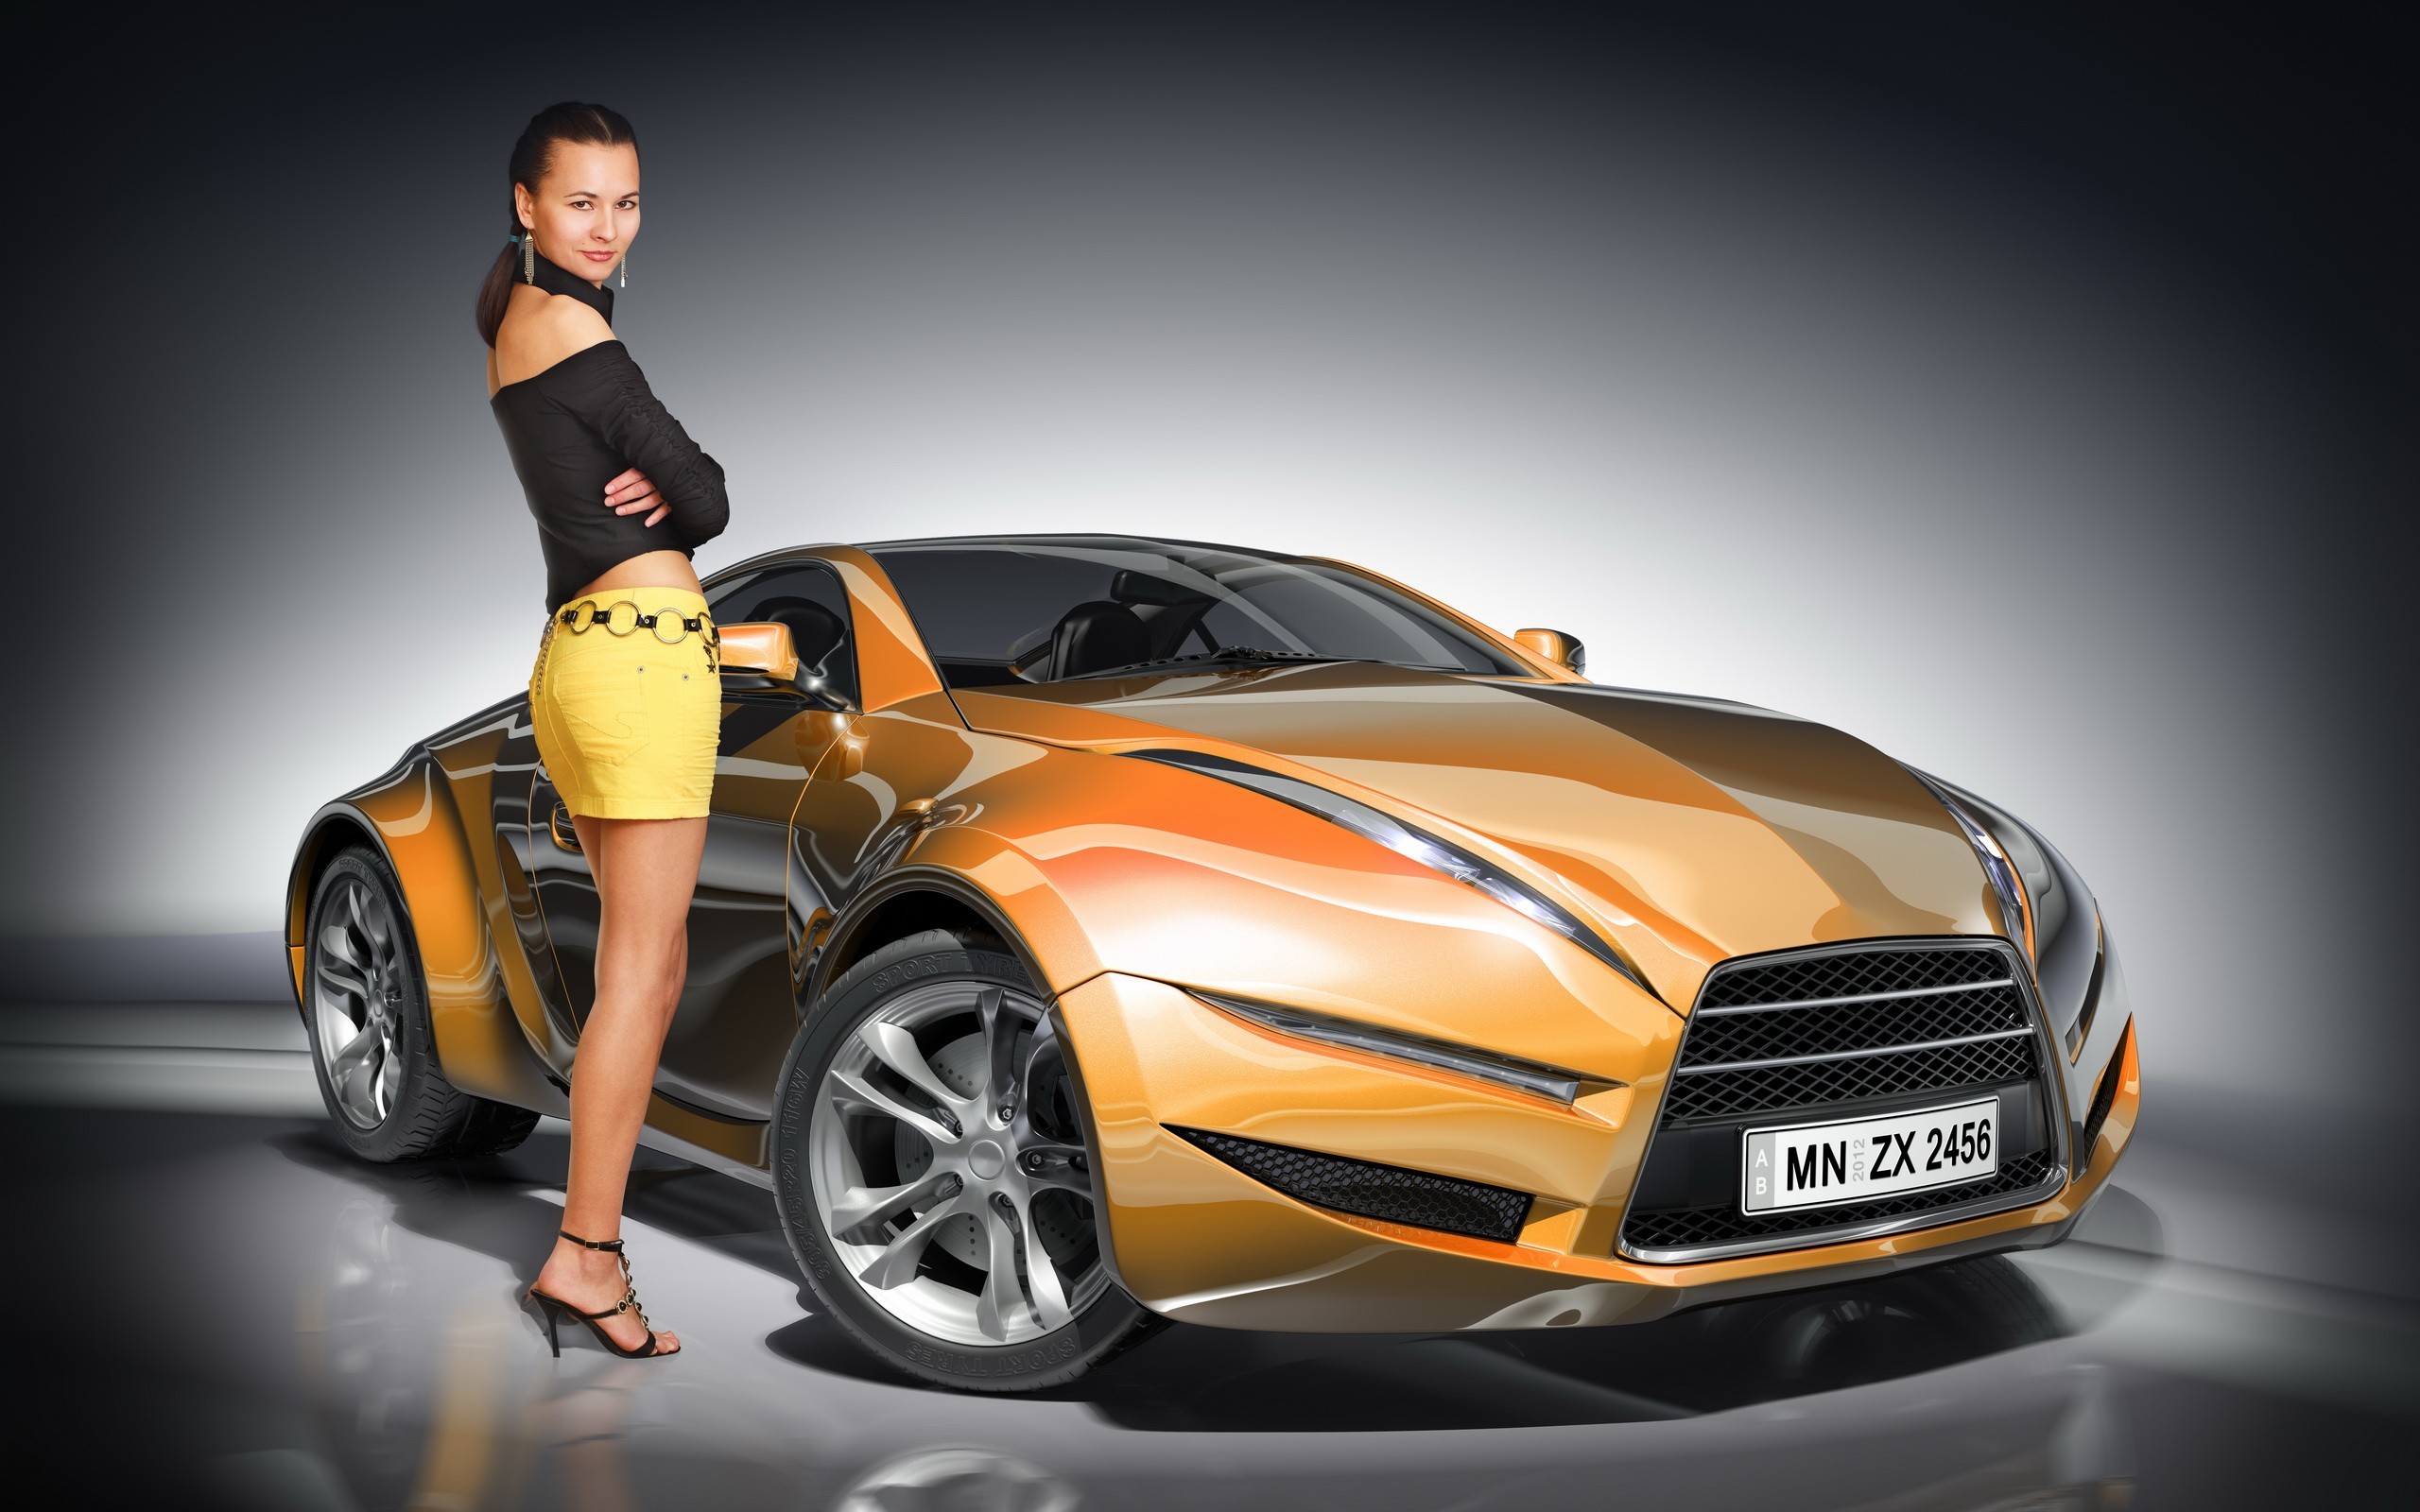 2560x1600 Car And Girls Wallpapers Nice Collection